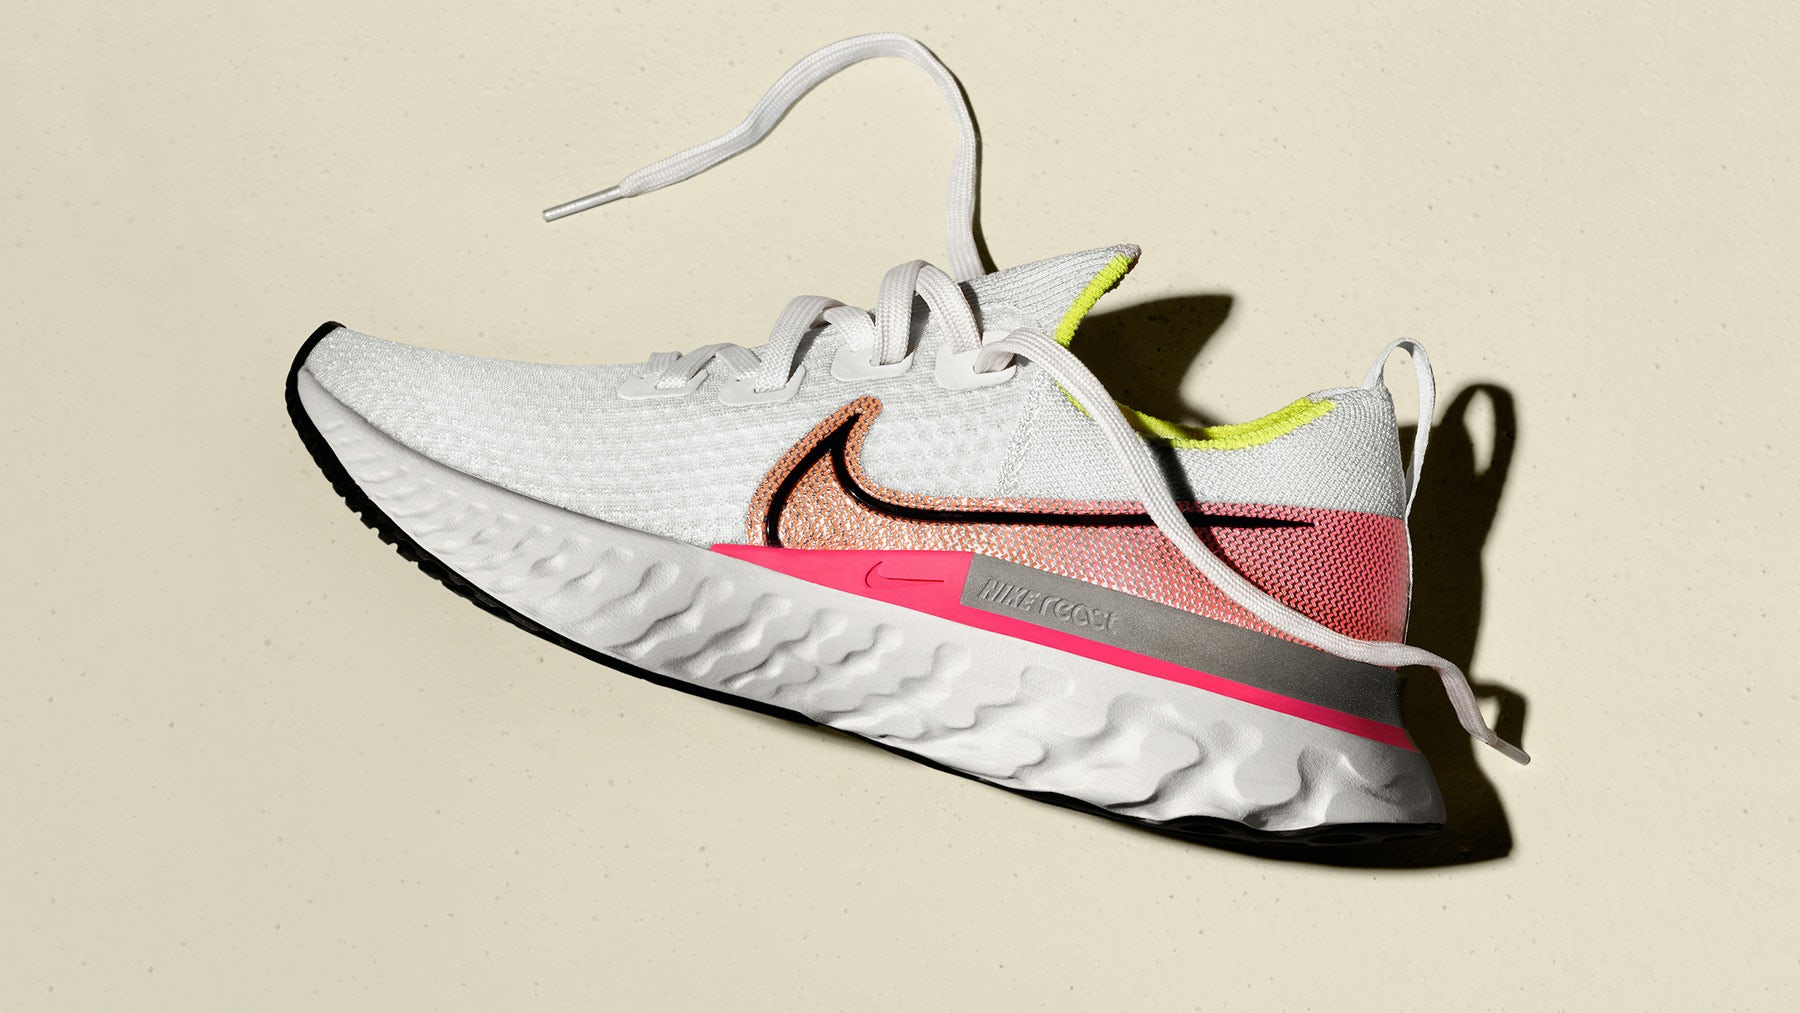 gráfico instinto profesional Report: Athletics Body to Tighten Rules After Nike's Vaporfly Helps Break  Records | BoF